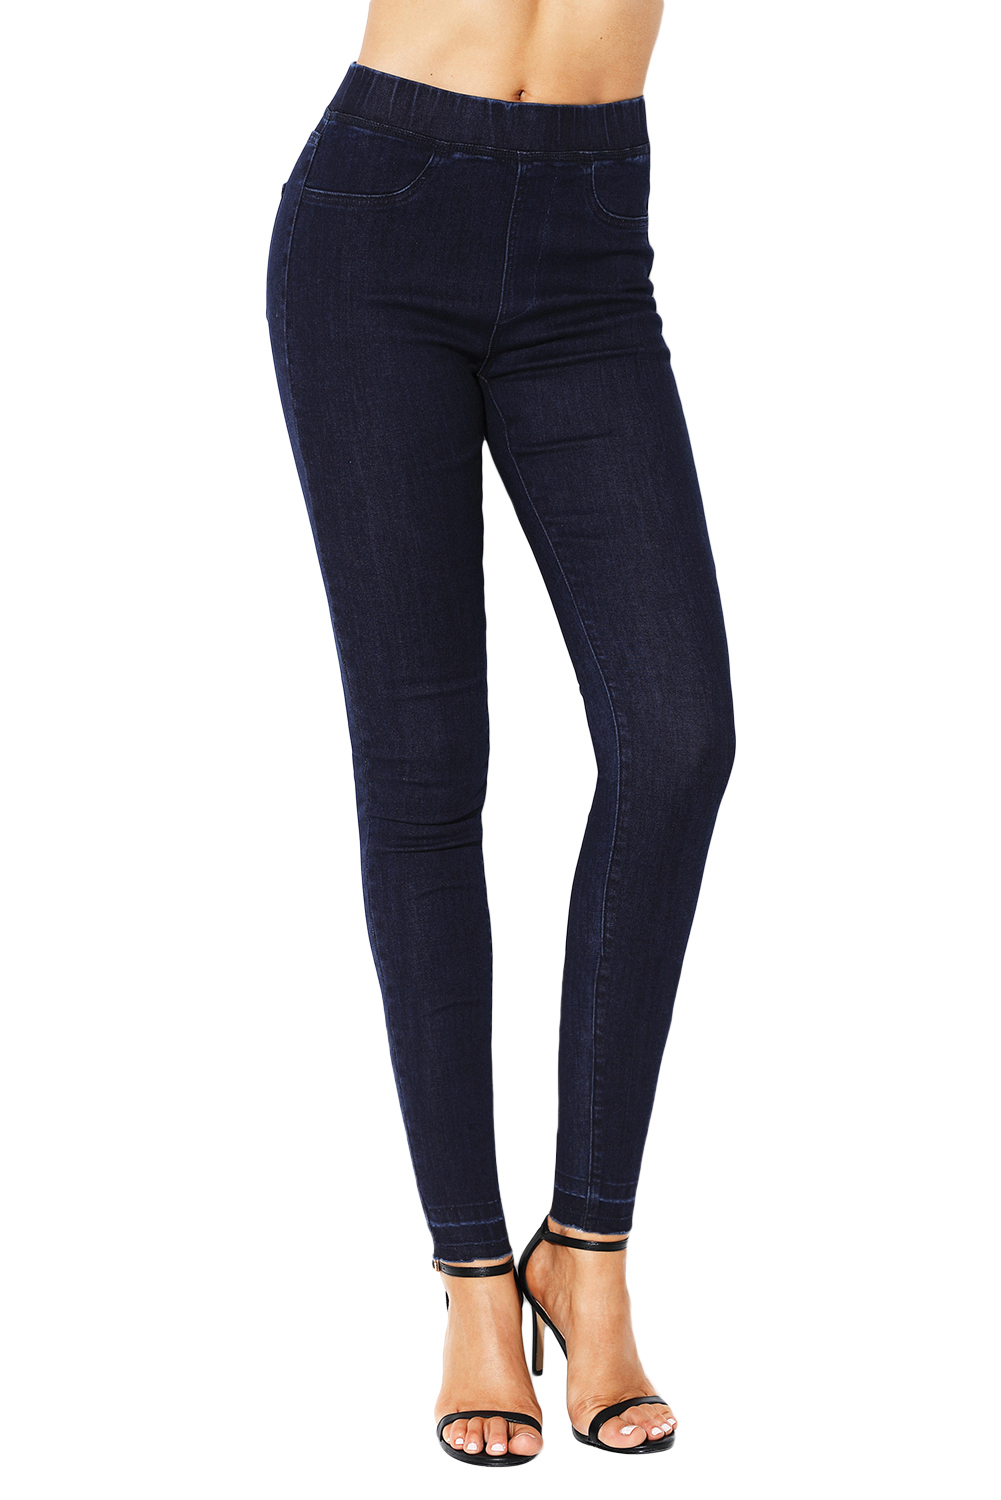 new navy blue elastic waist jeans stretch pants for women